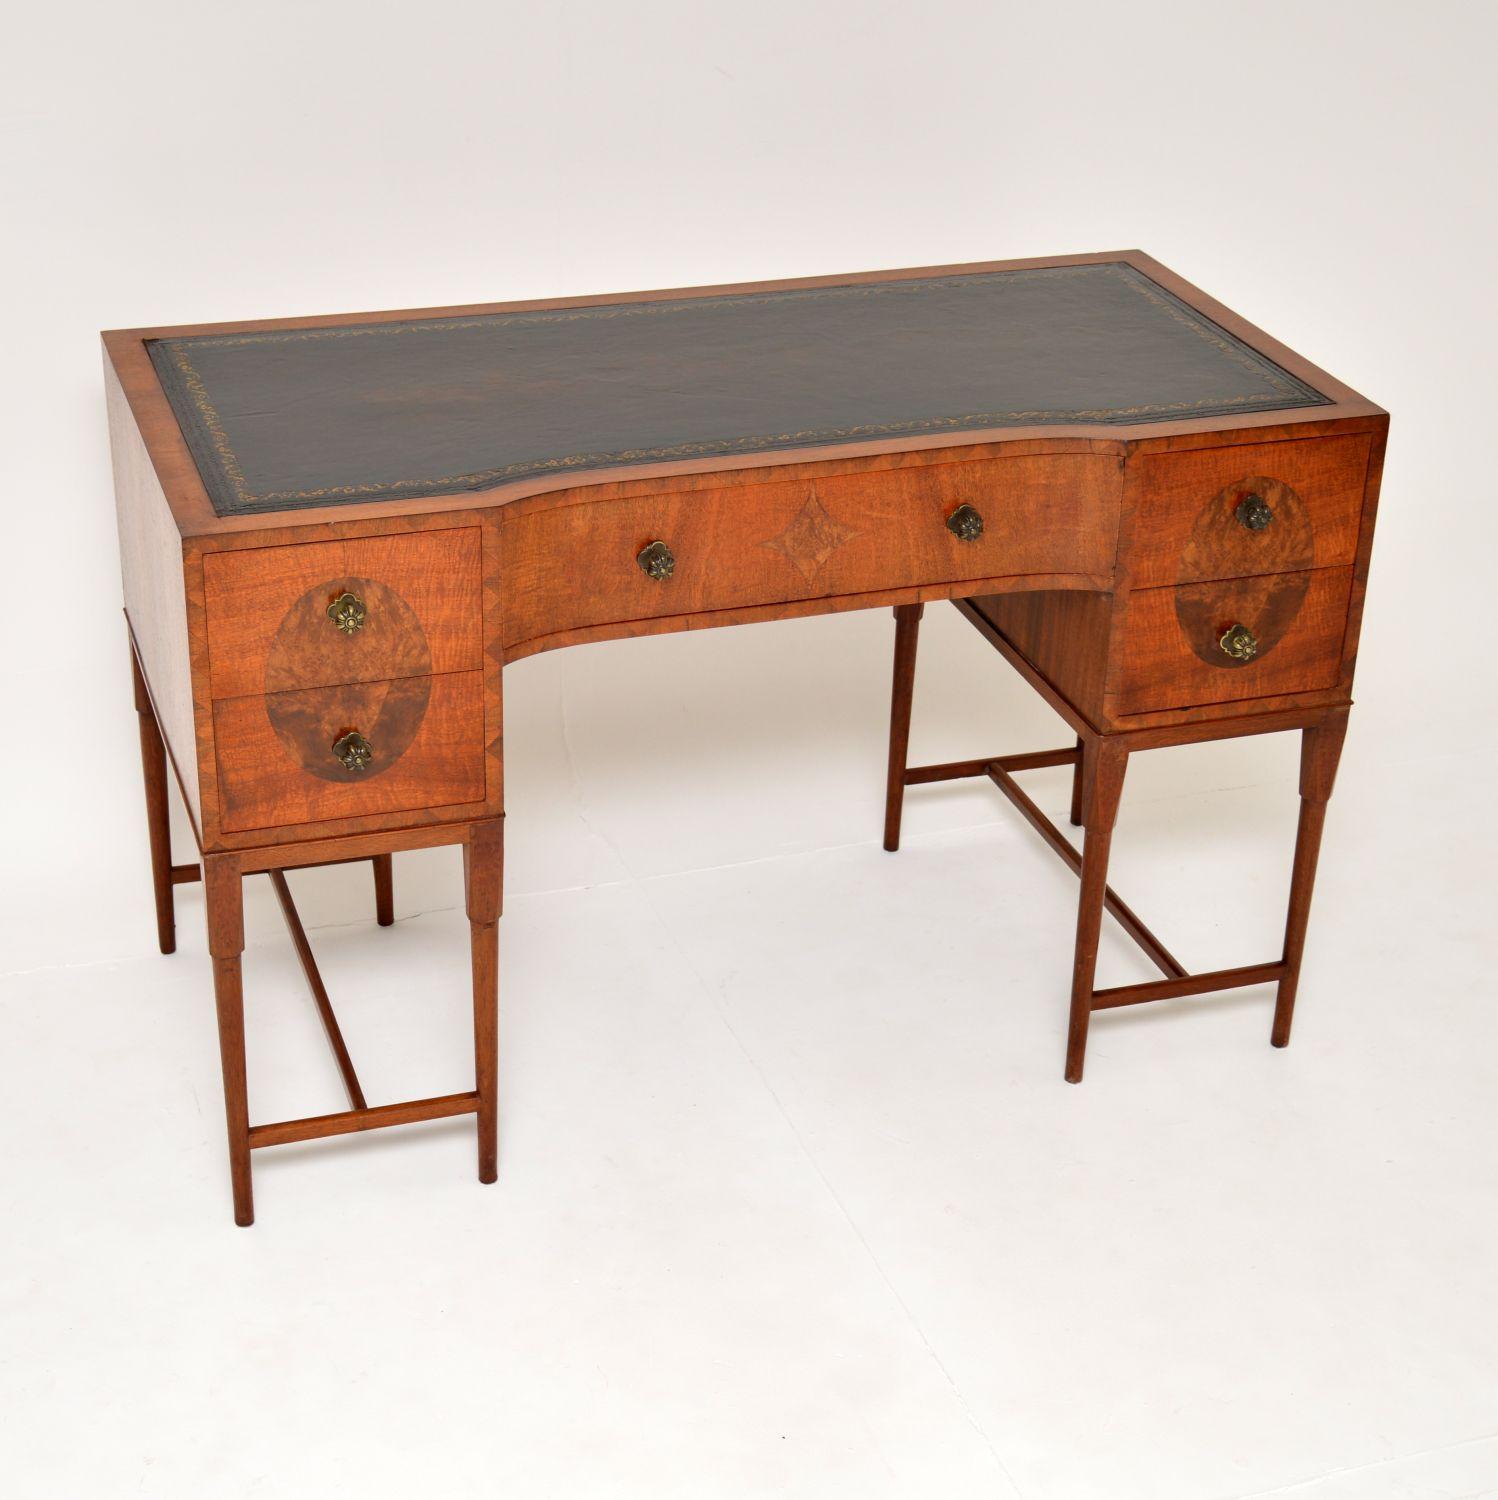 A superb antique leather top desk made from burr walnut. This was made in England, it dates from around the 1900-1920 period.

It is a fantastic size and is of wonderful quality. The carcass is wood, with the front edges inlaid in a beautiful